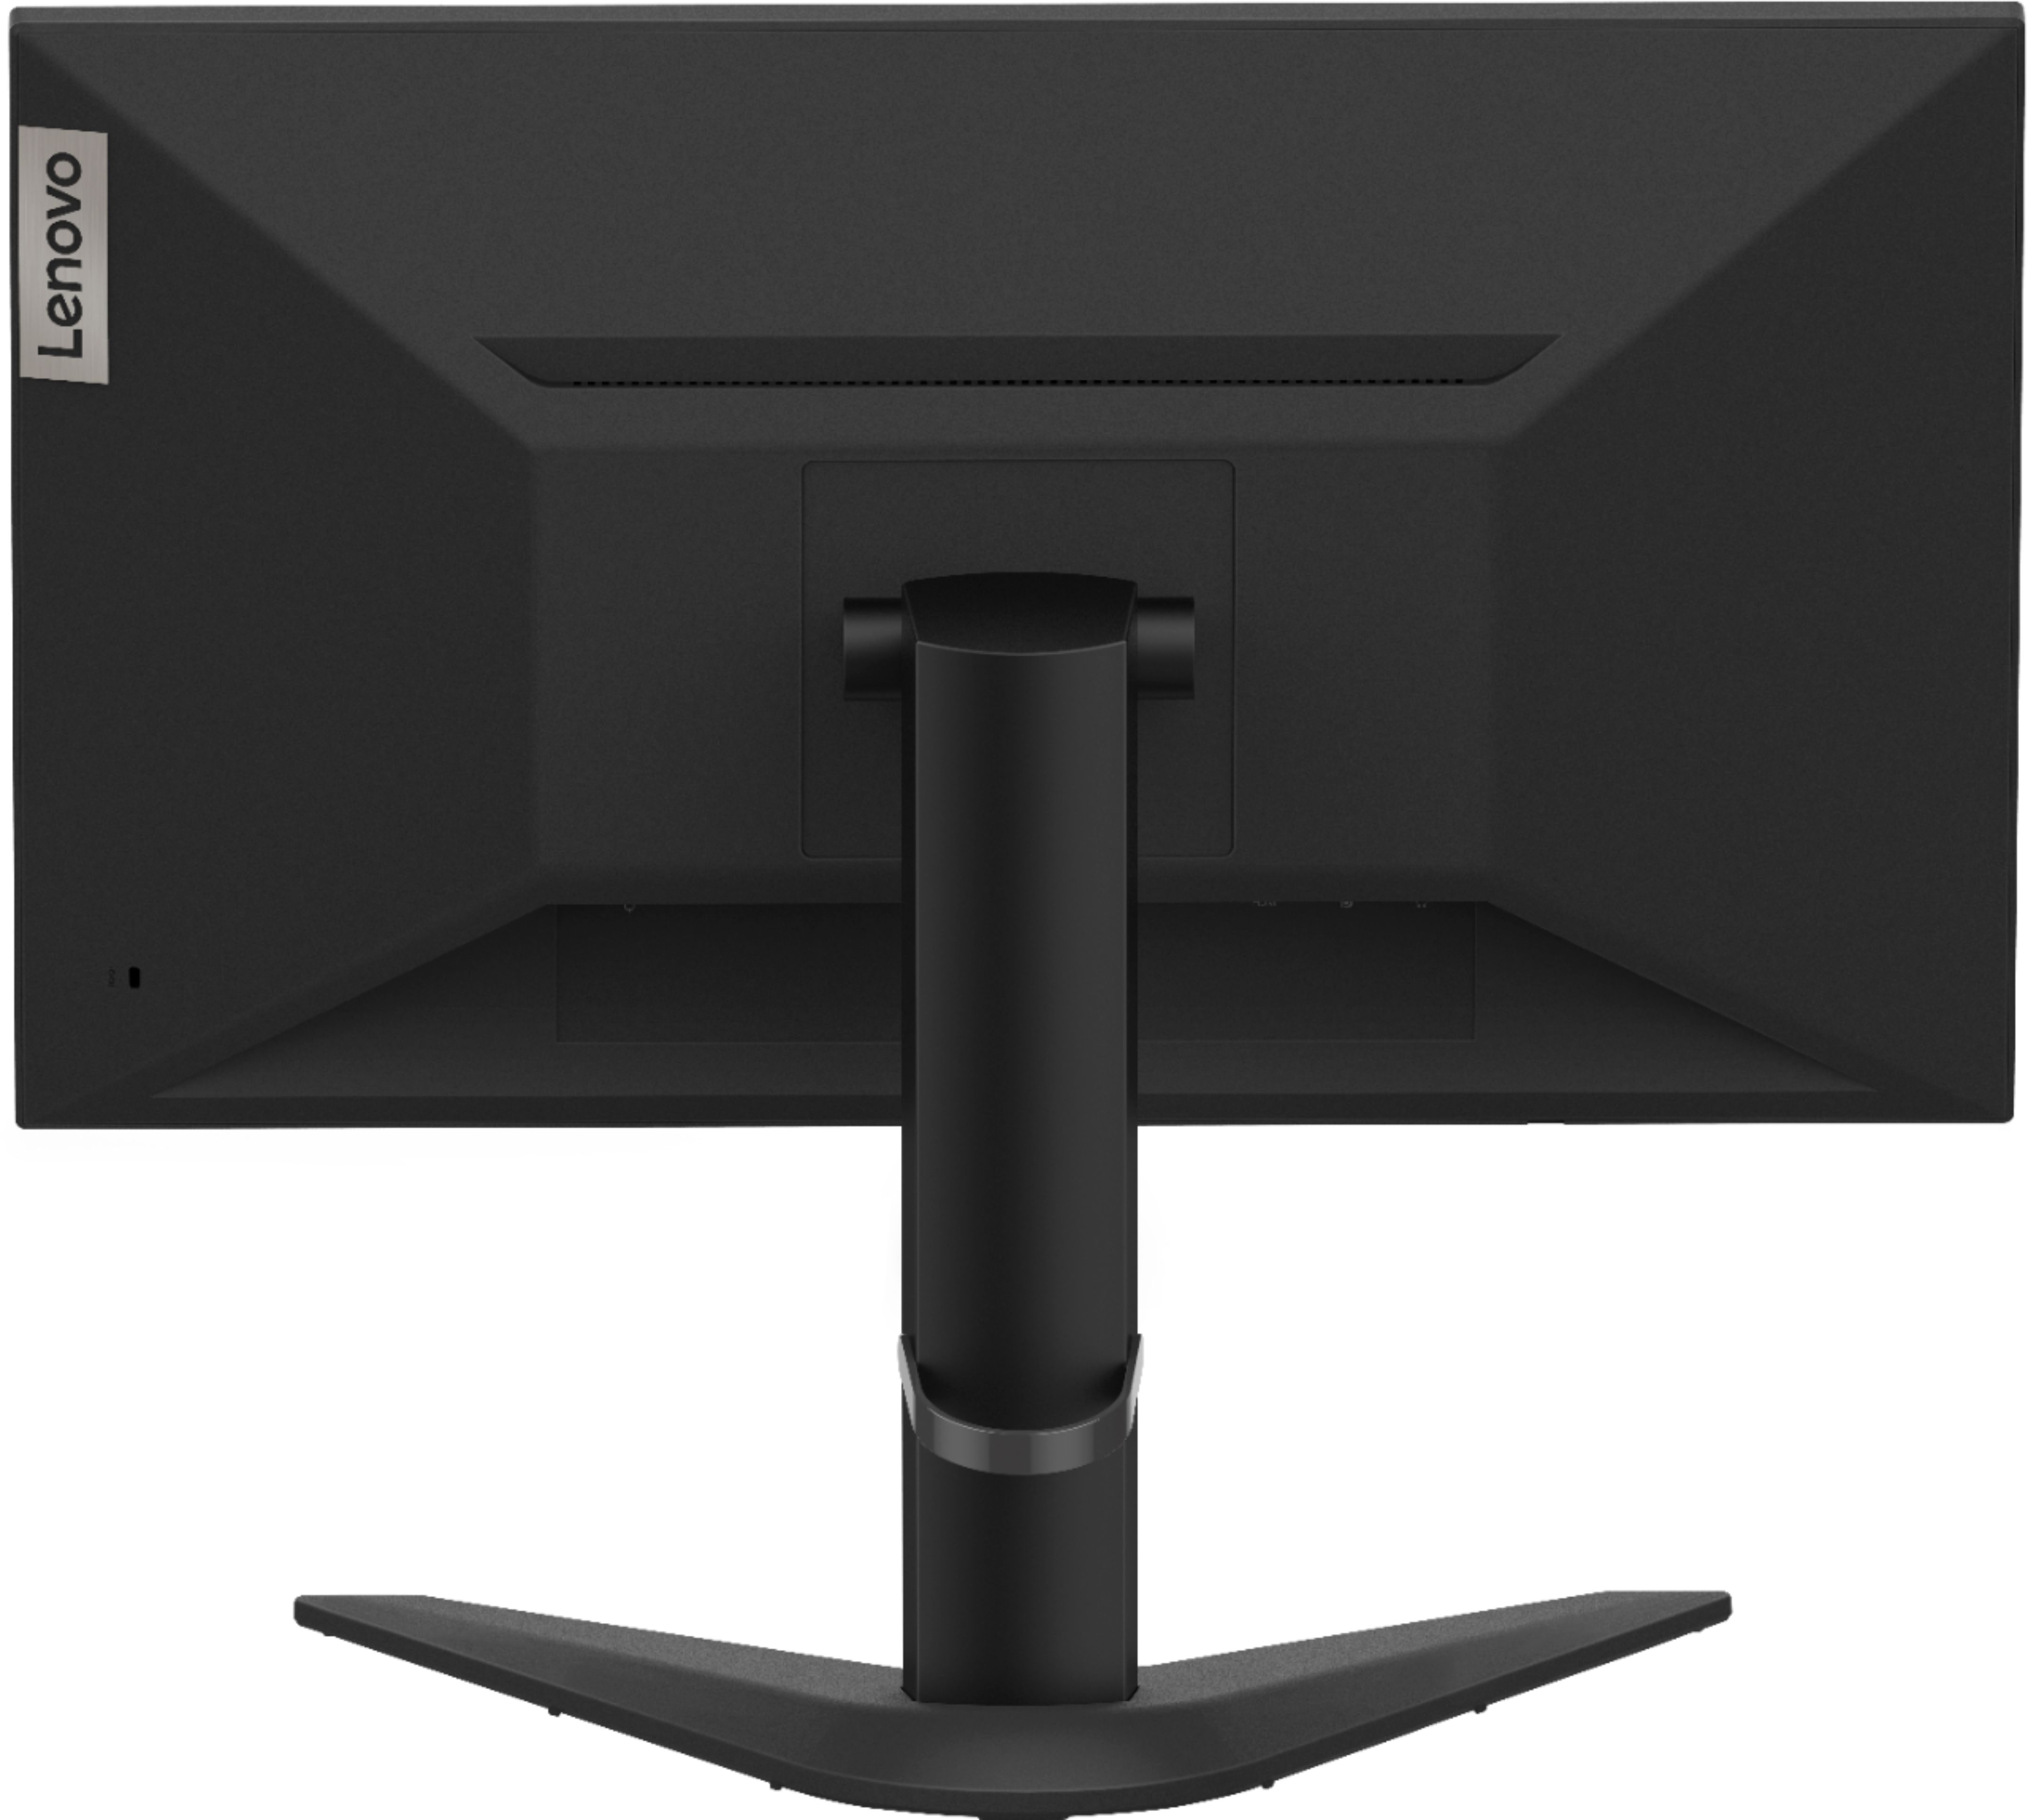 Back View: Samsung - Odyssey G5 27" LED Curved WQHD FreeSync Monitor with HDR (HDMI) - Black